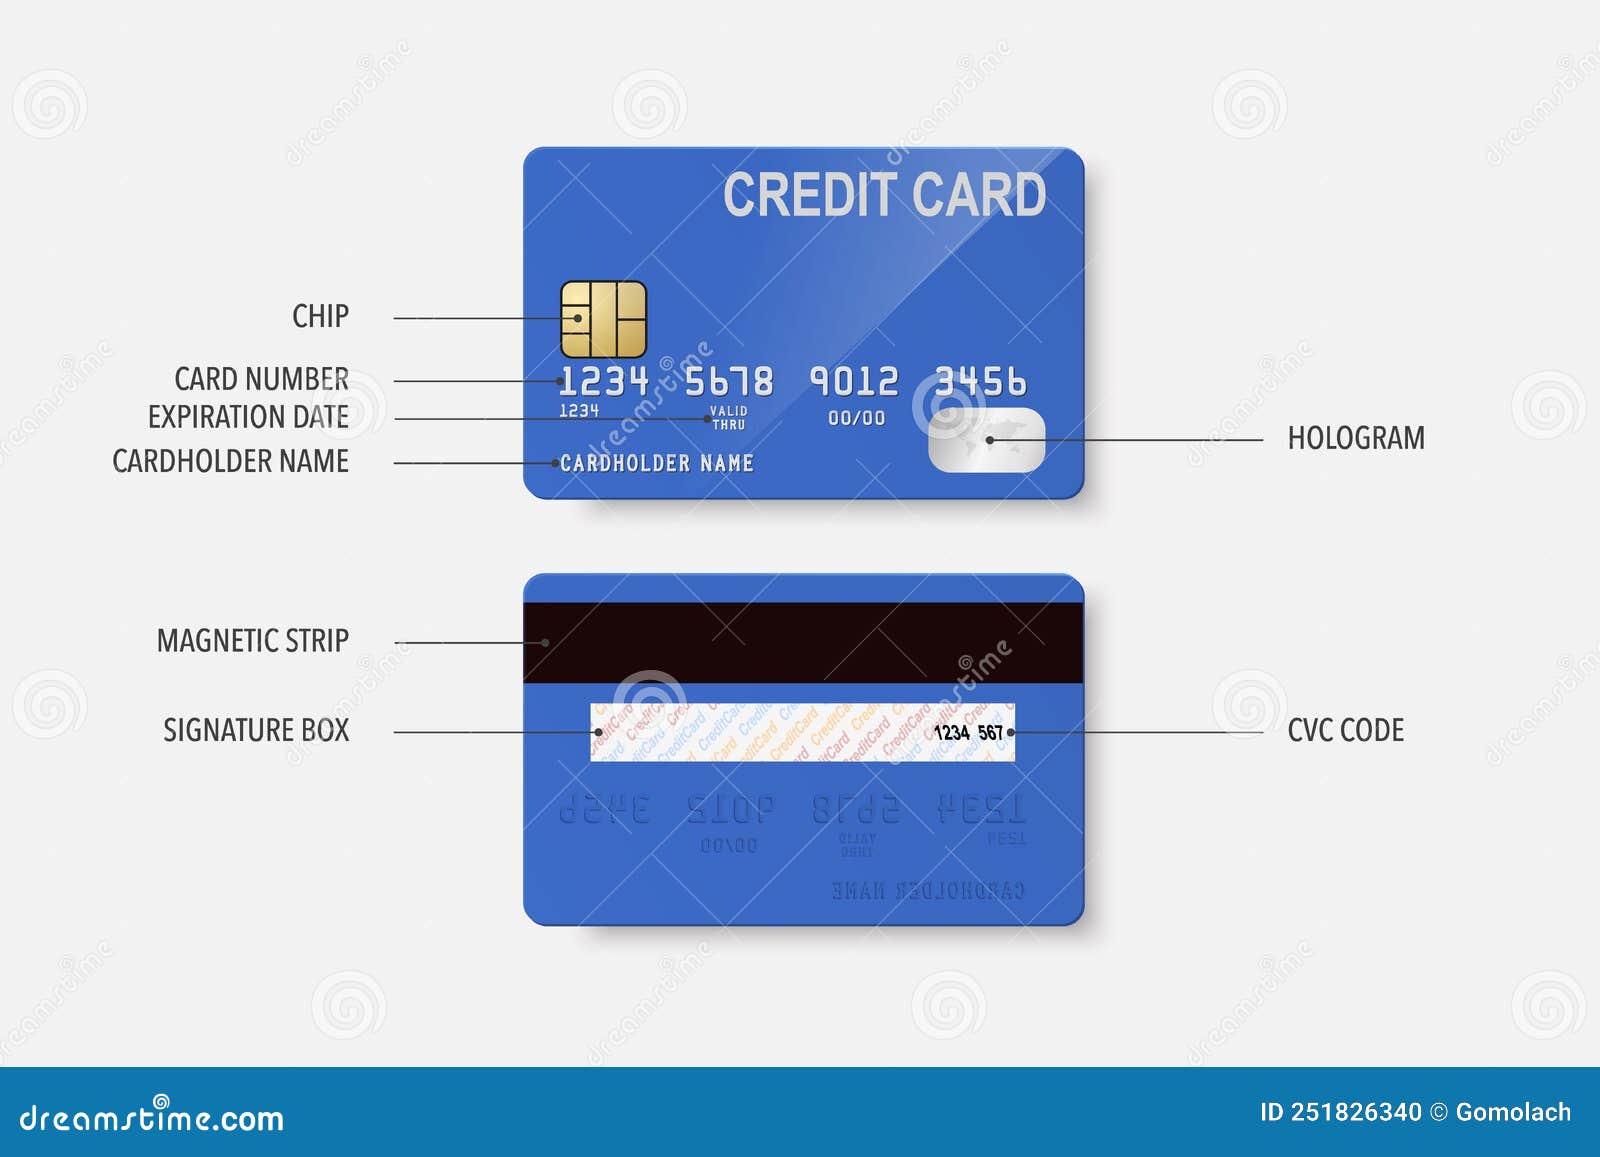 plastic-debit-or-credit-card-with-a-payment-approved-icon-bank-card-e